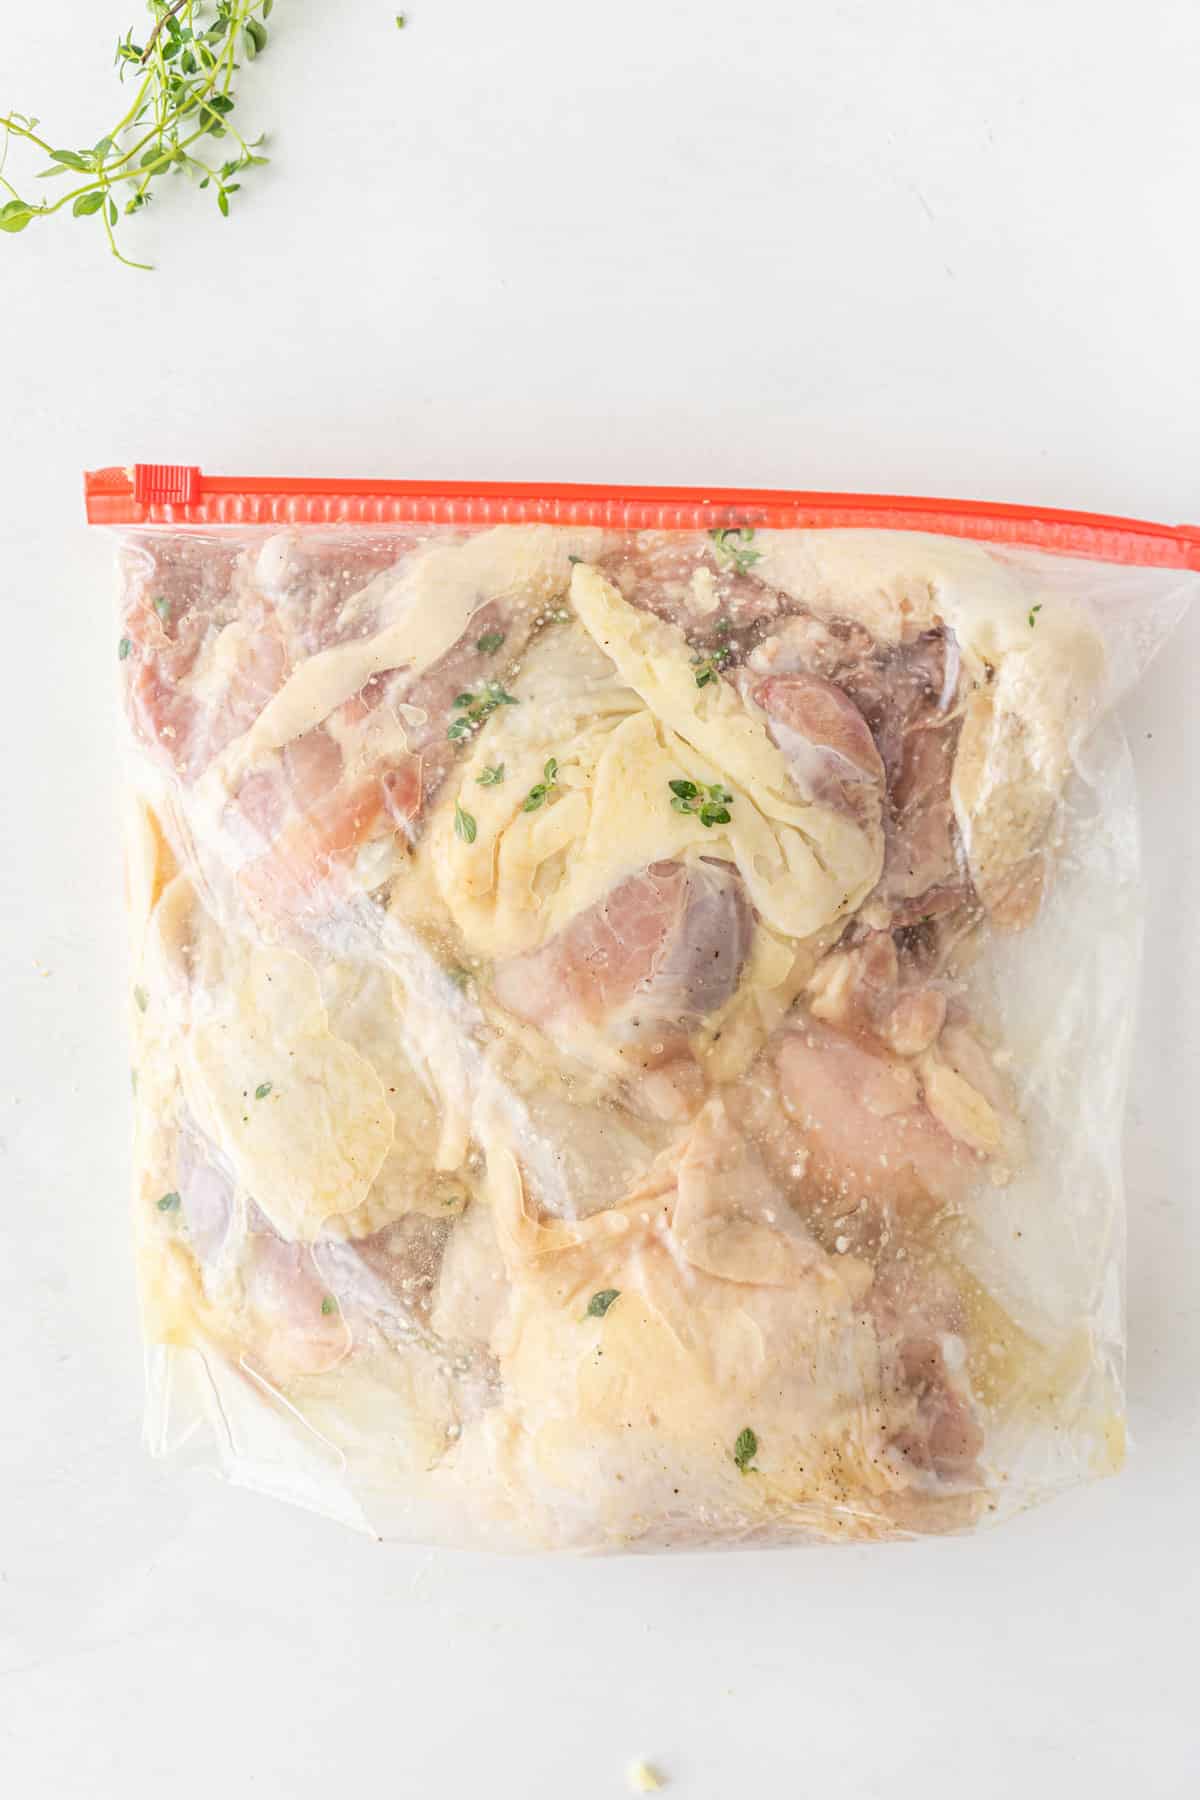 Marinating the meat for Sheet pan Chicken Thighs recipe in a bag